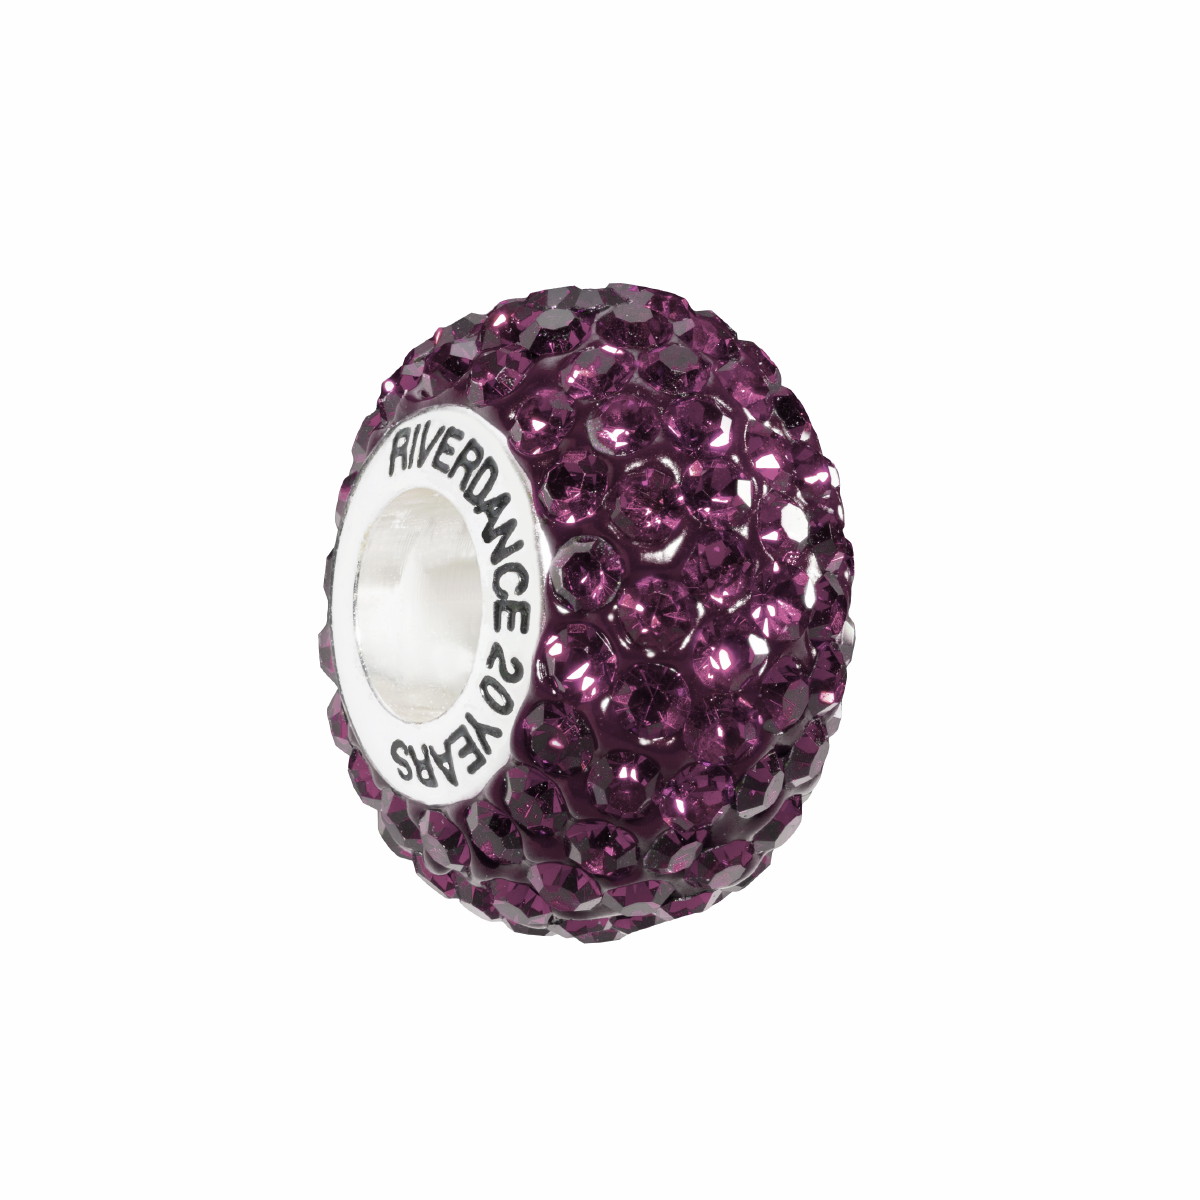 Official Riverdance20 Crystal Encrusted Bead - Purple